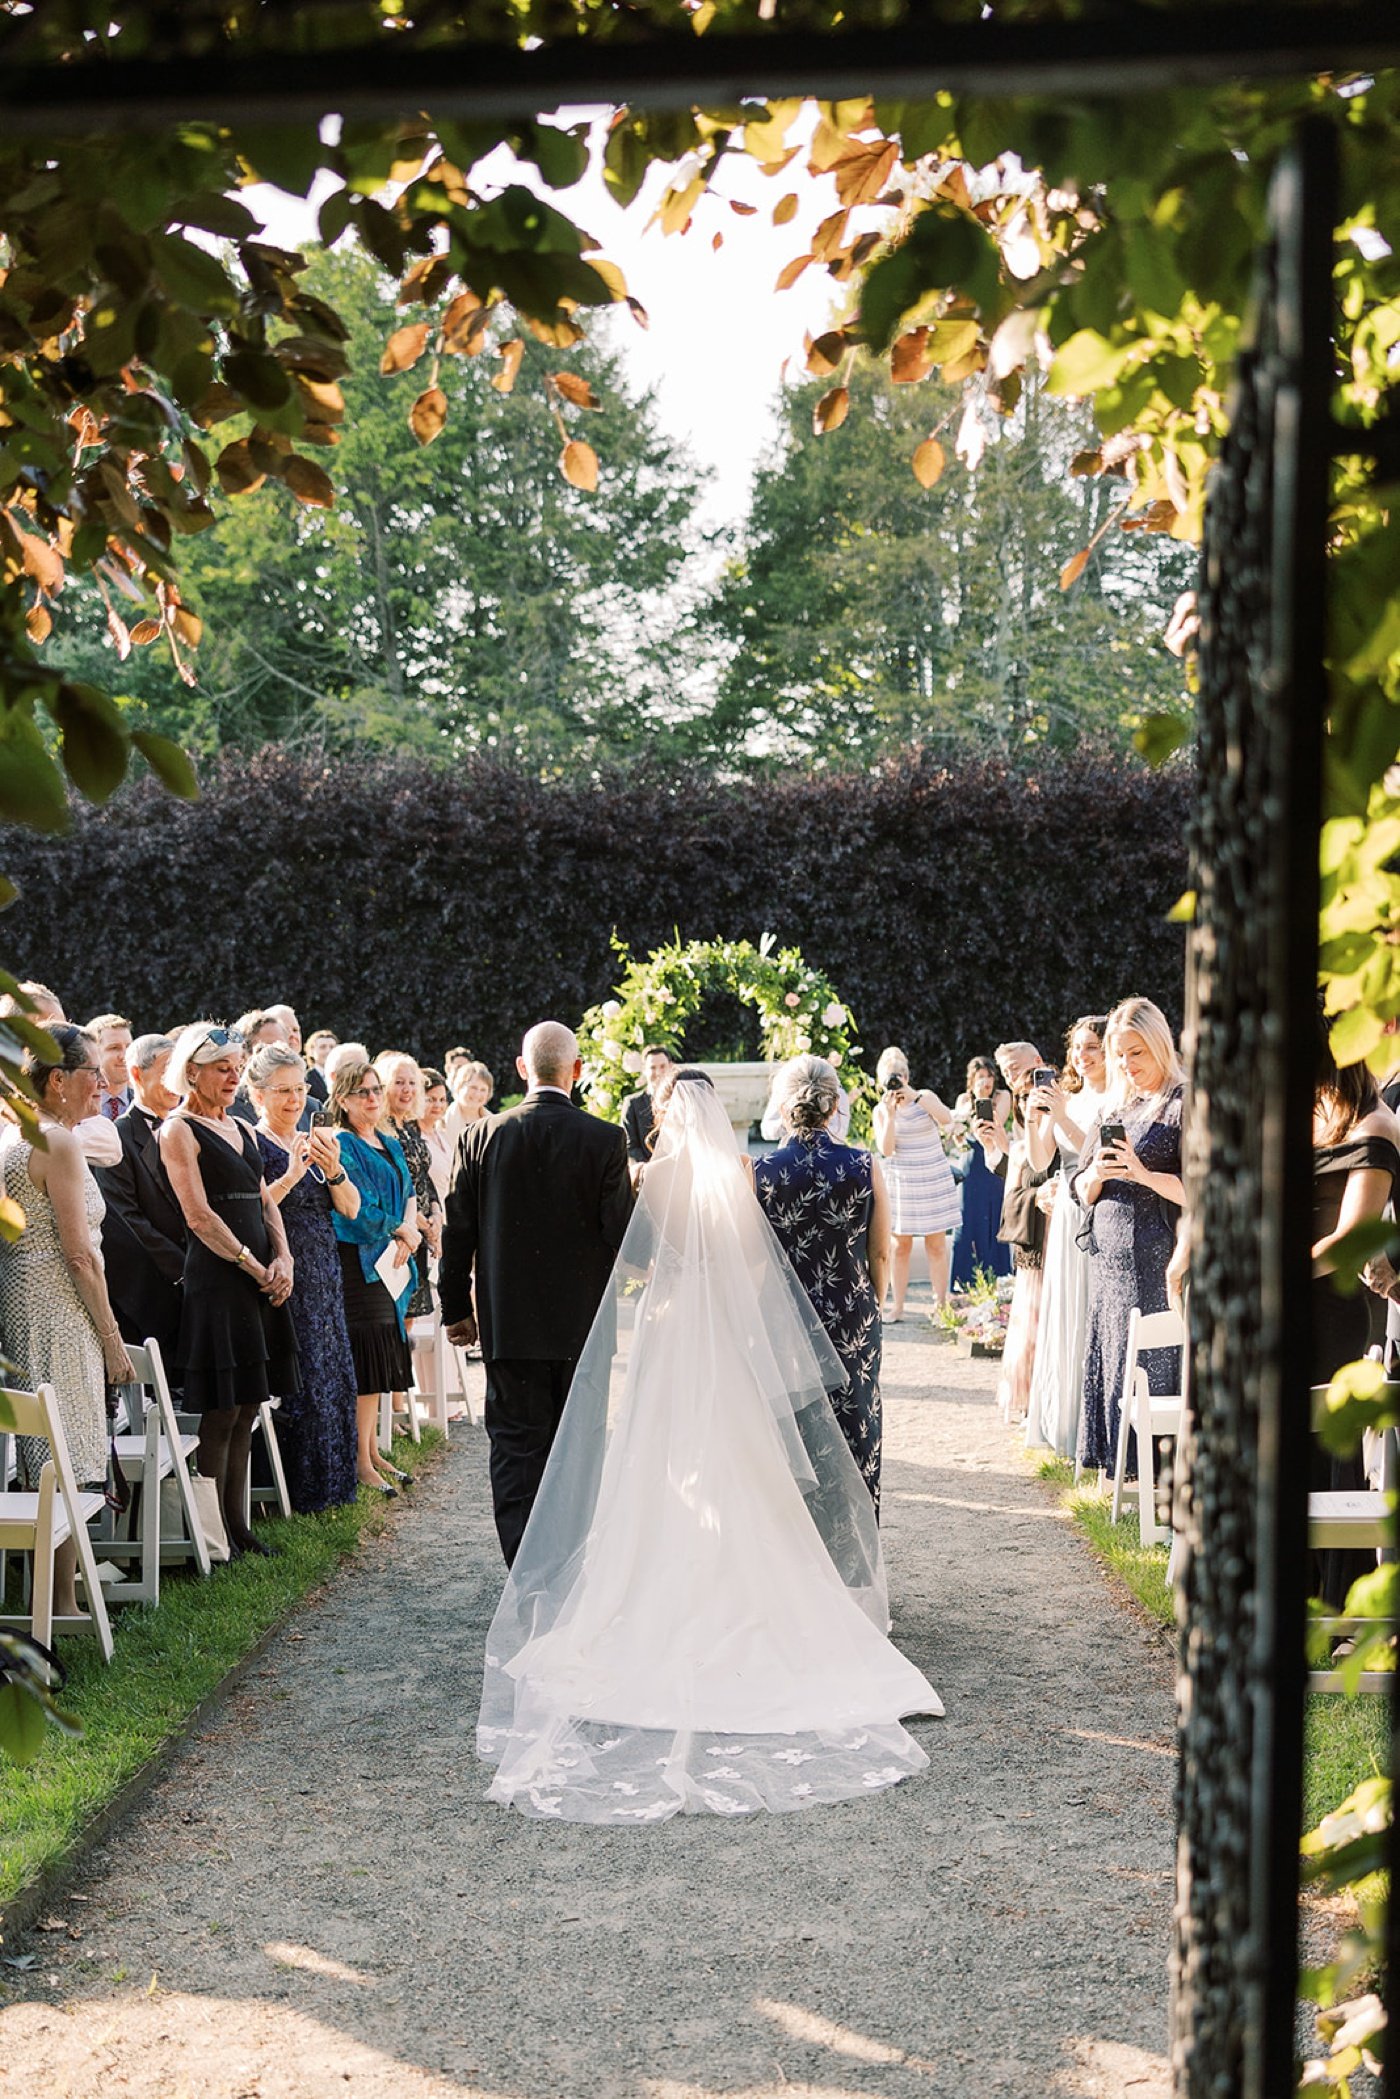 Outdoor wedding ceremony at The Garden at Elm Bank